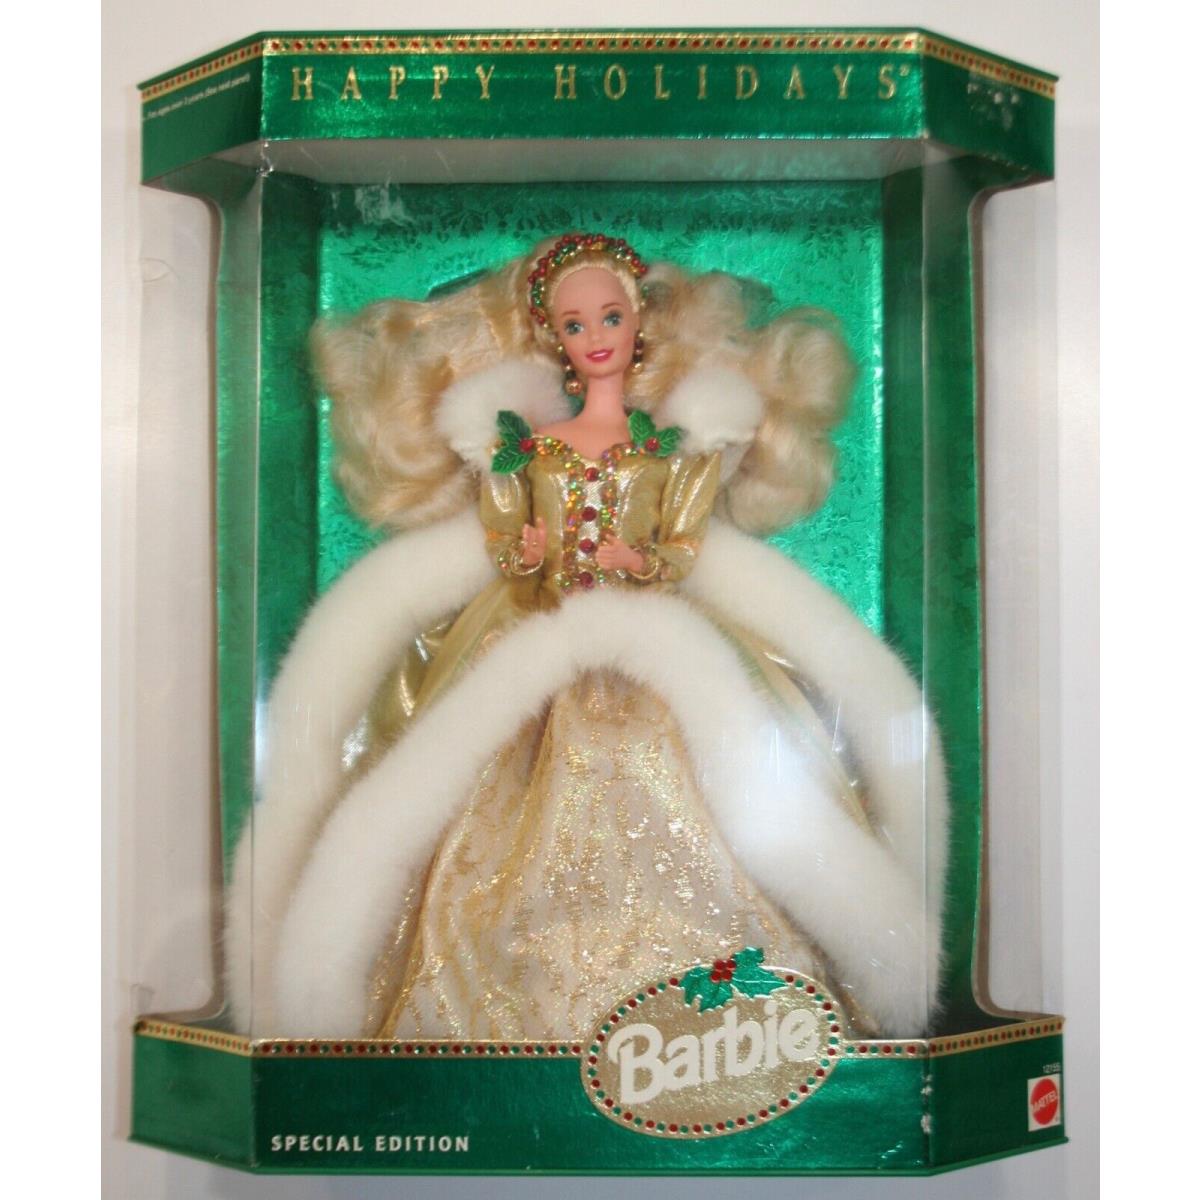 Factory Misprint Happy Holidays Special Edition 1994 Barbie Doll